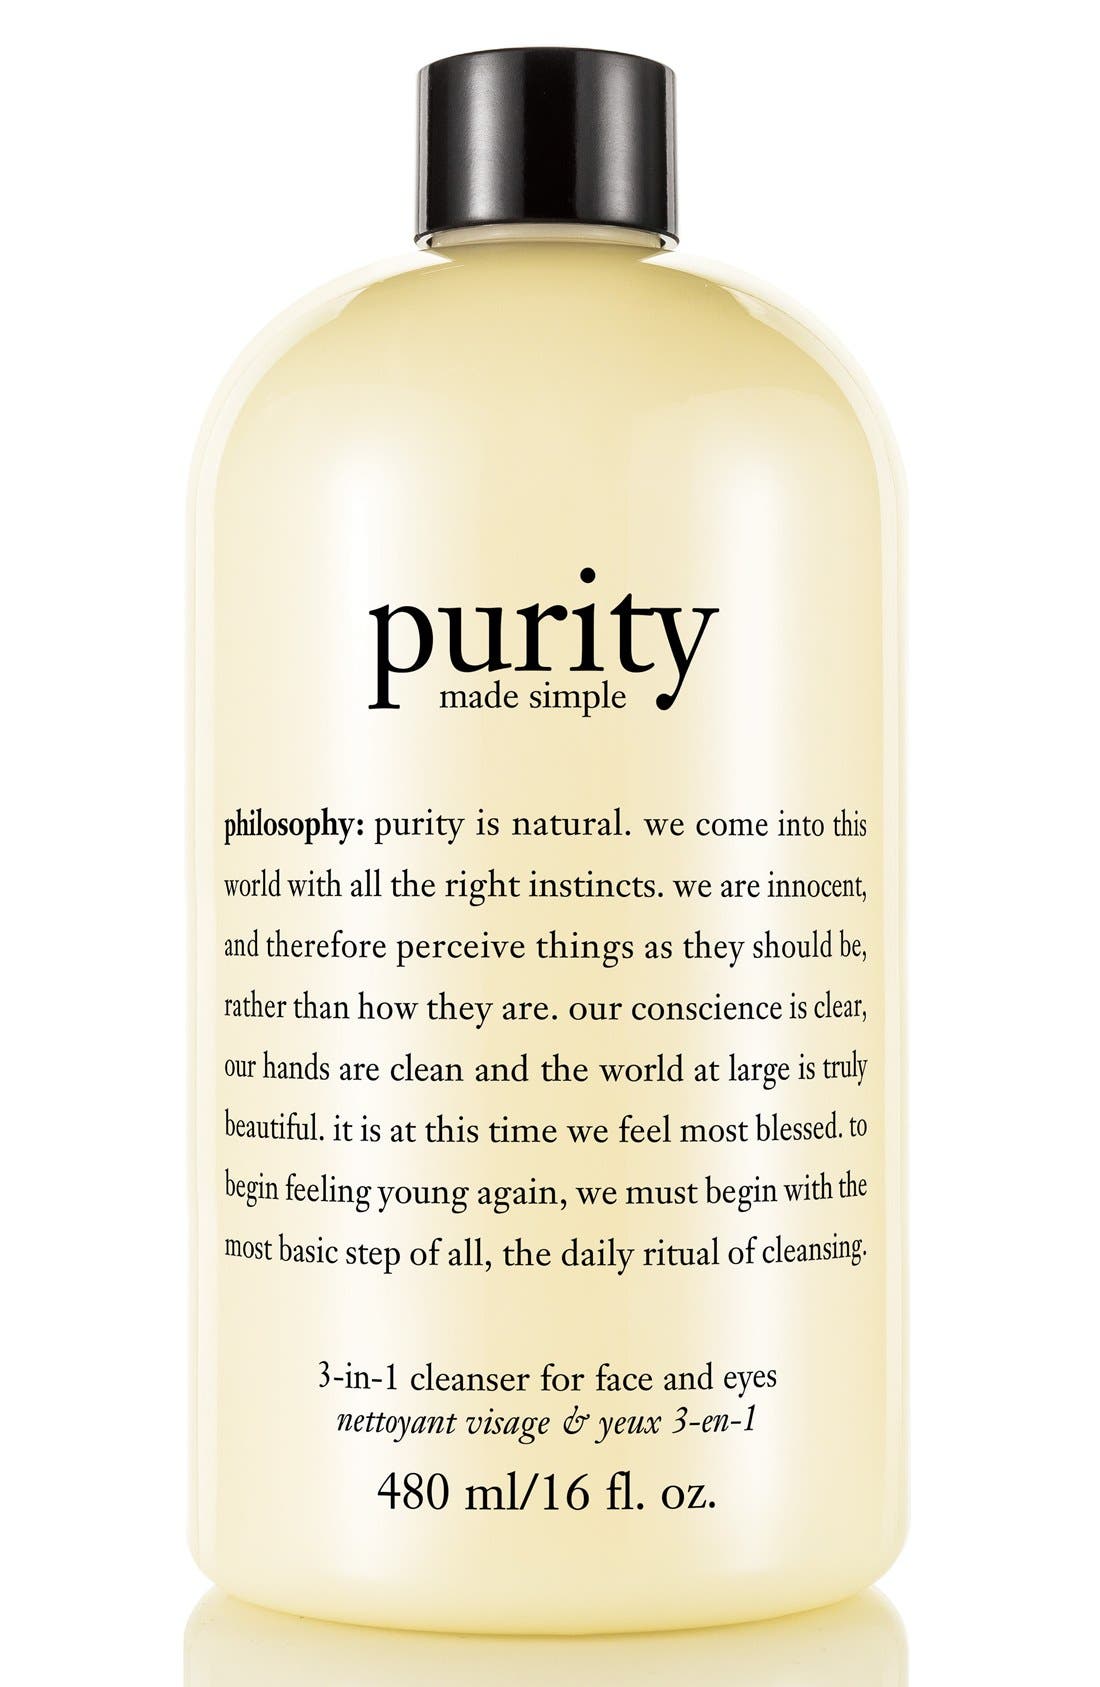 purity facial cleanser